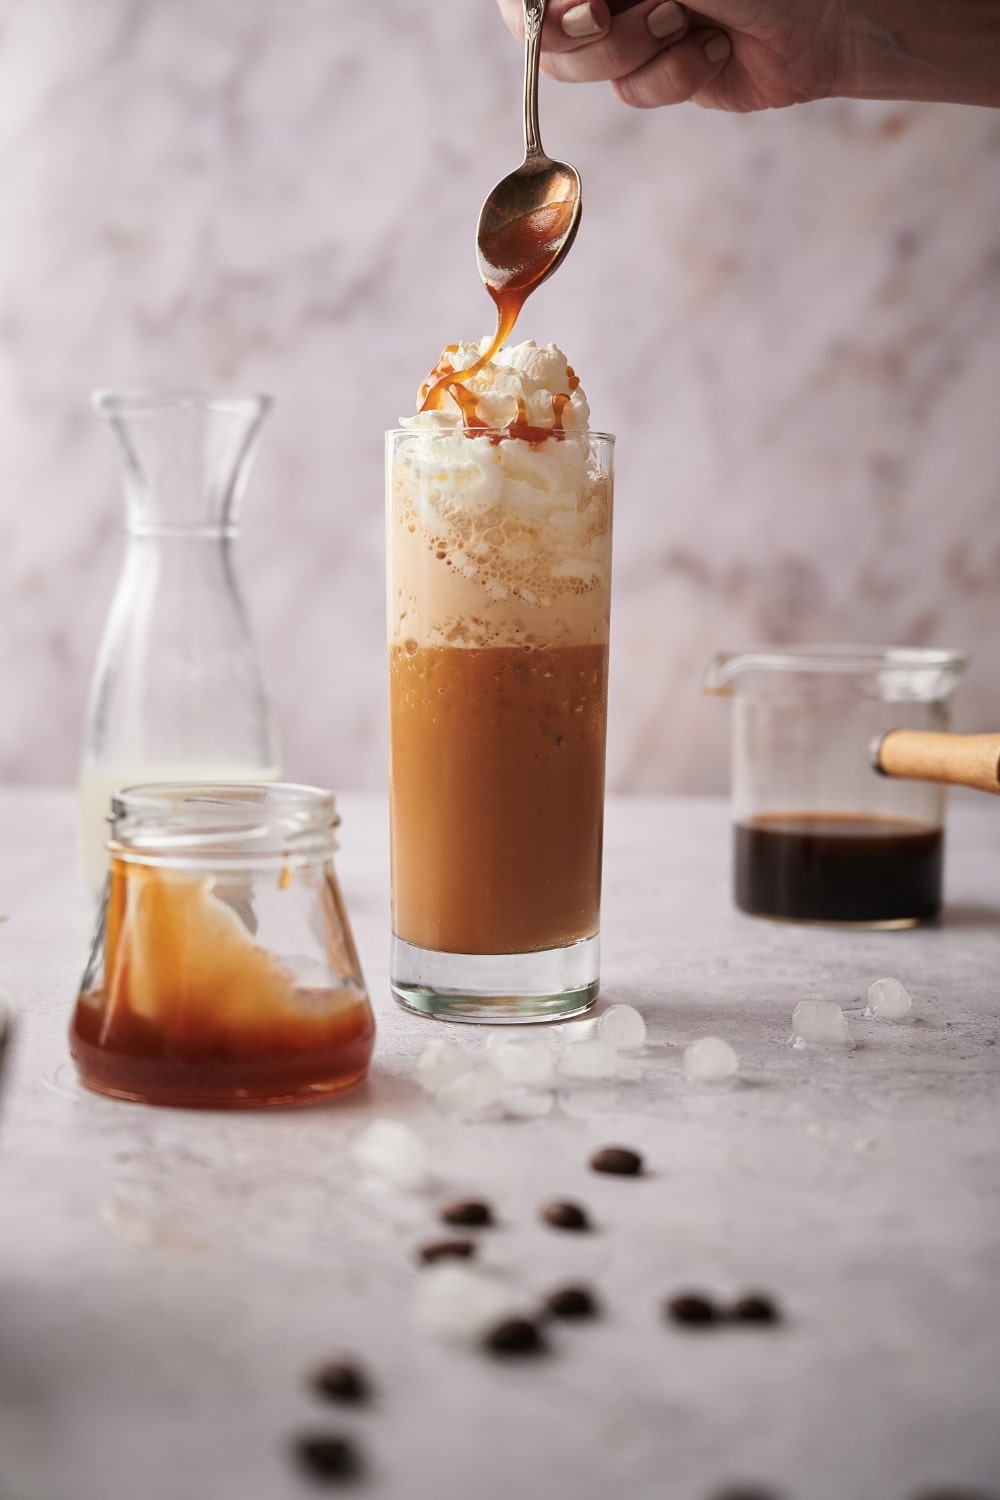 Keto caramel sauce being drizzled on a tall skinny glass of keto frappuccino with whipped cream. Surrounding it is a jar of caramel sauce, a half filled carafe of almond milk, and a glass coffee pitcher half filled with coffee.